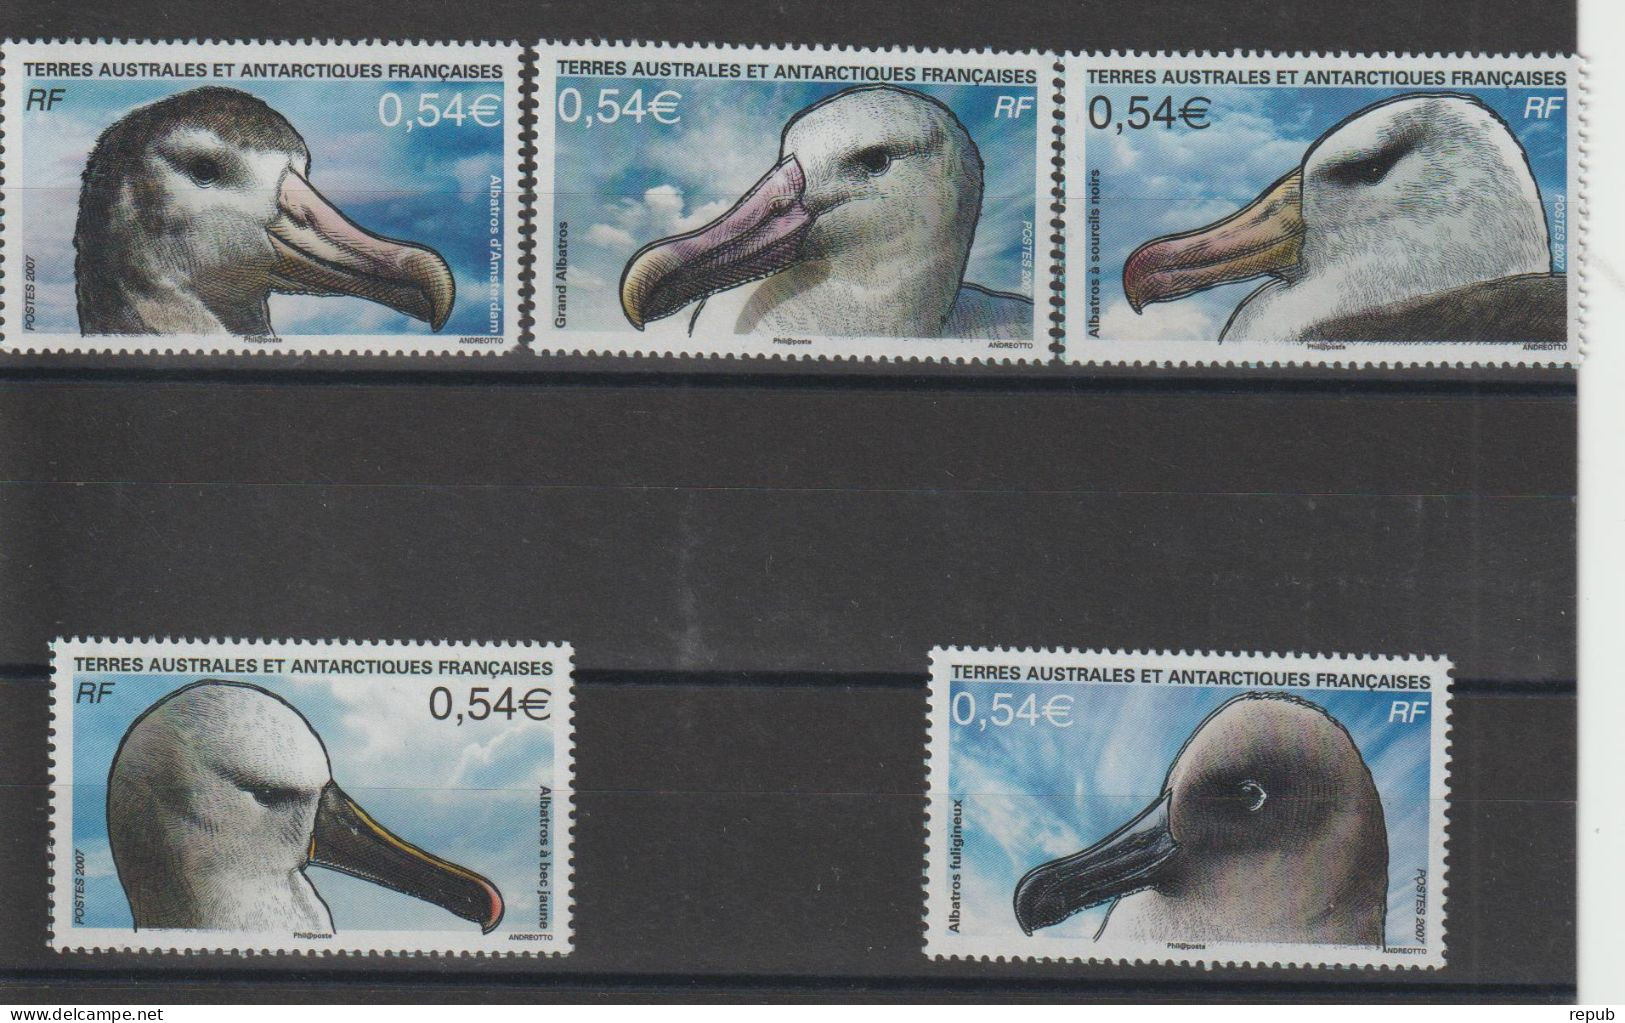 TAAF 2007 Timbres Issus Du BF 17, 464-468, 5 Val ** MNH Coin Rogné Sur 1 Timbre - Ungebraucht